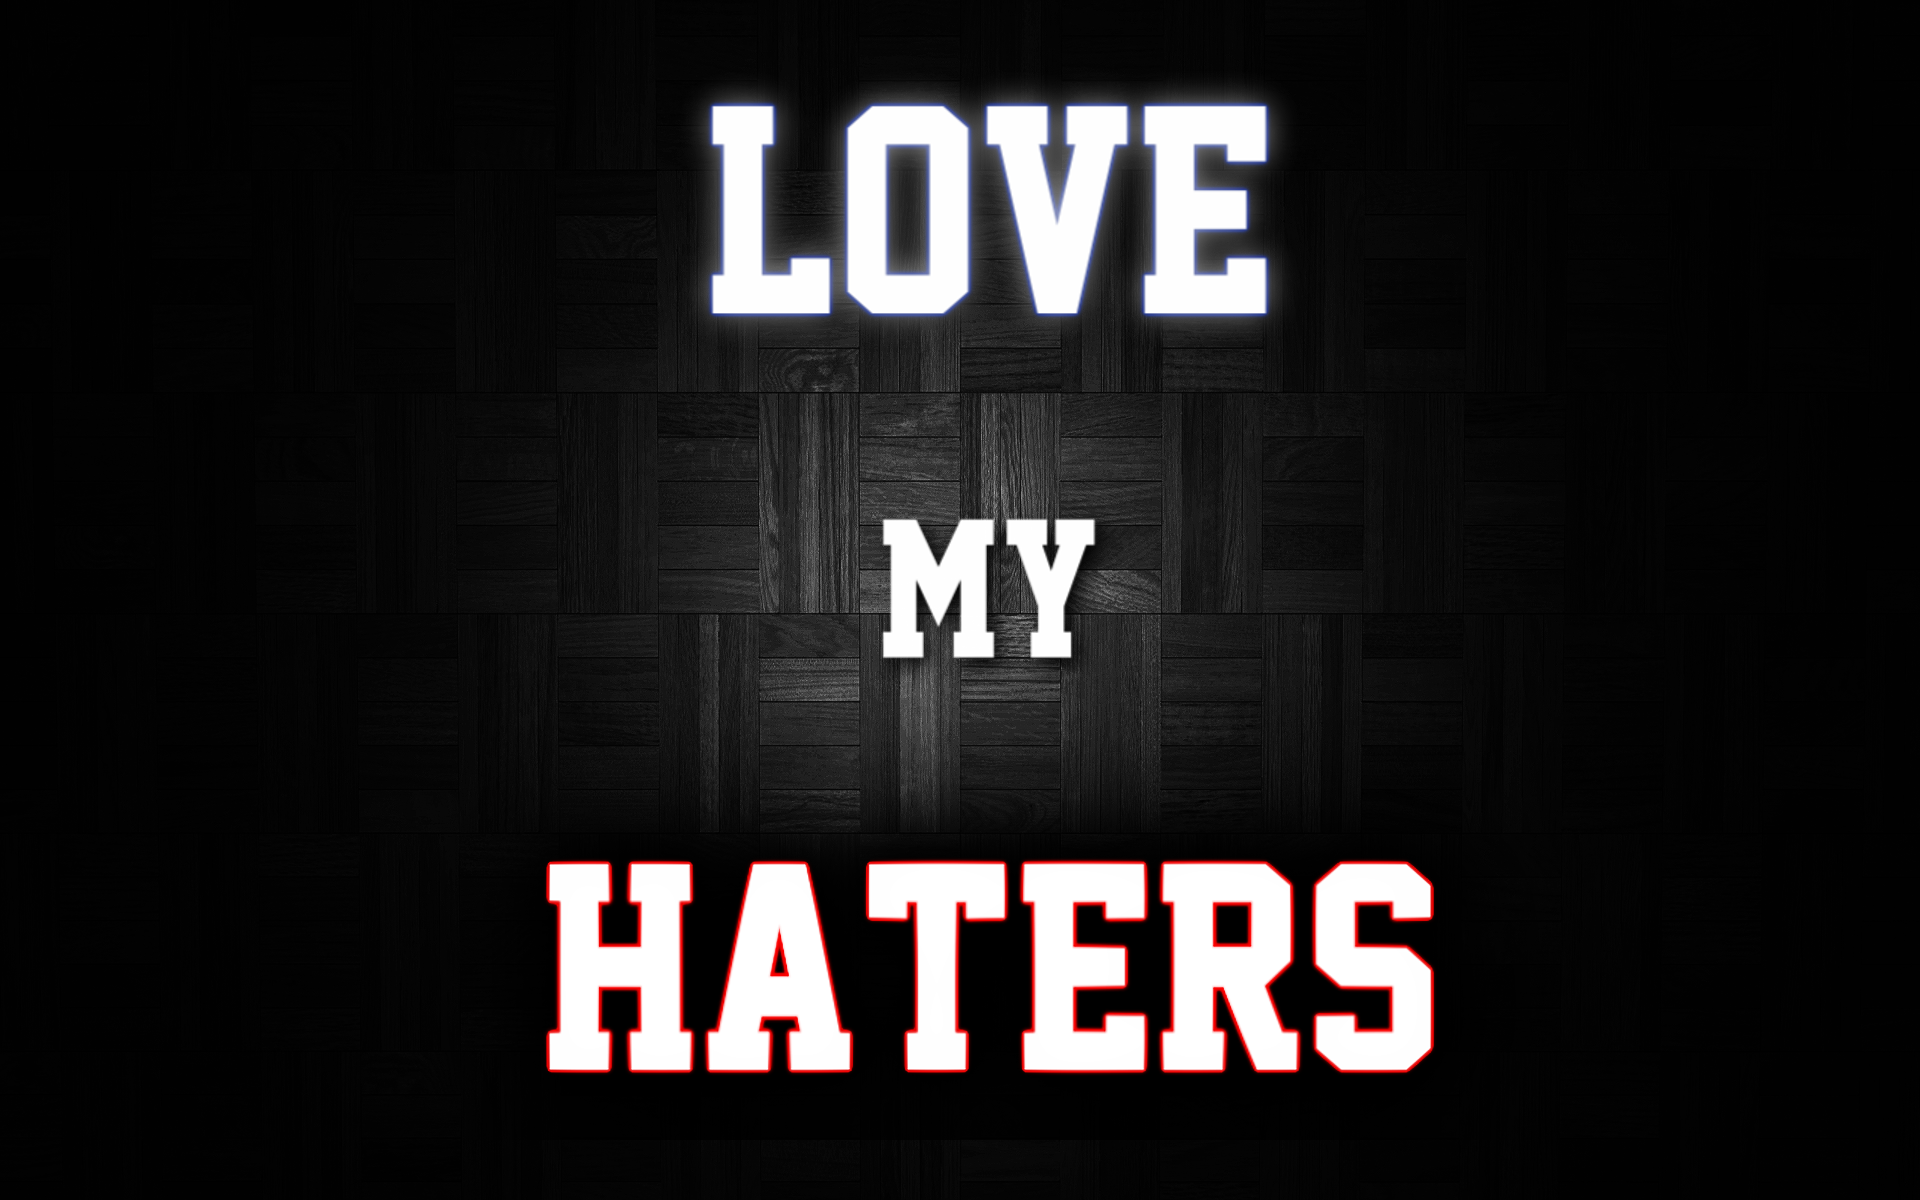 I Love My Haters Wallpaper. I Love My